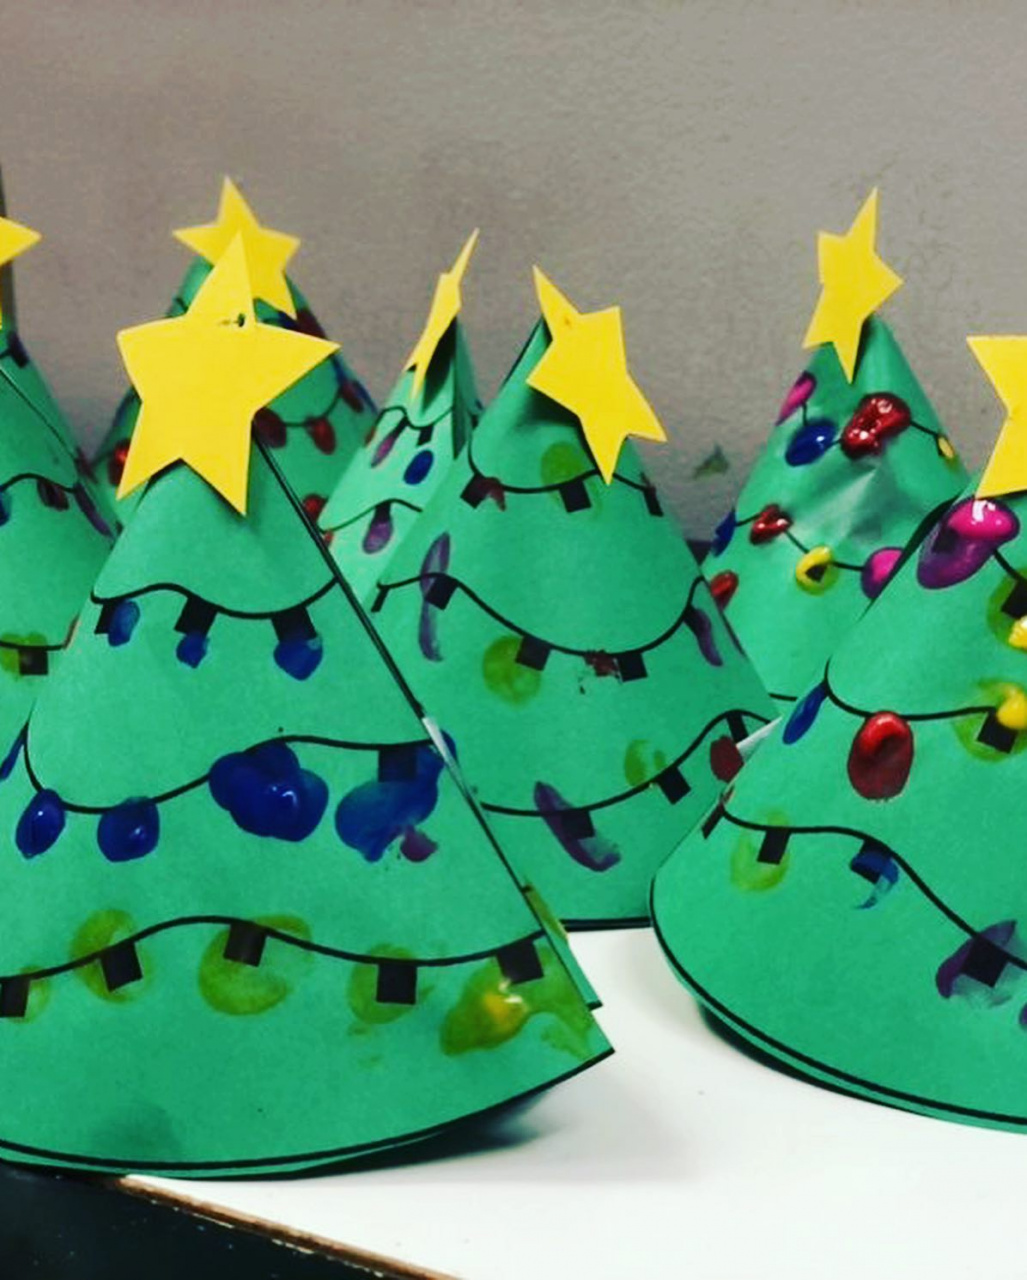 Construction Paper Christmas Trees